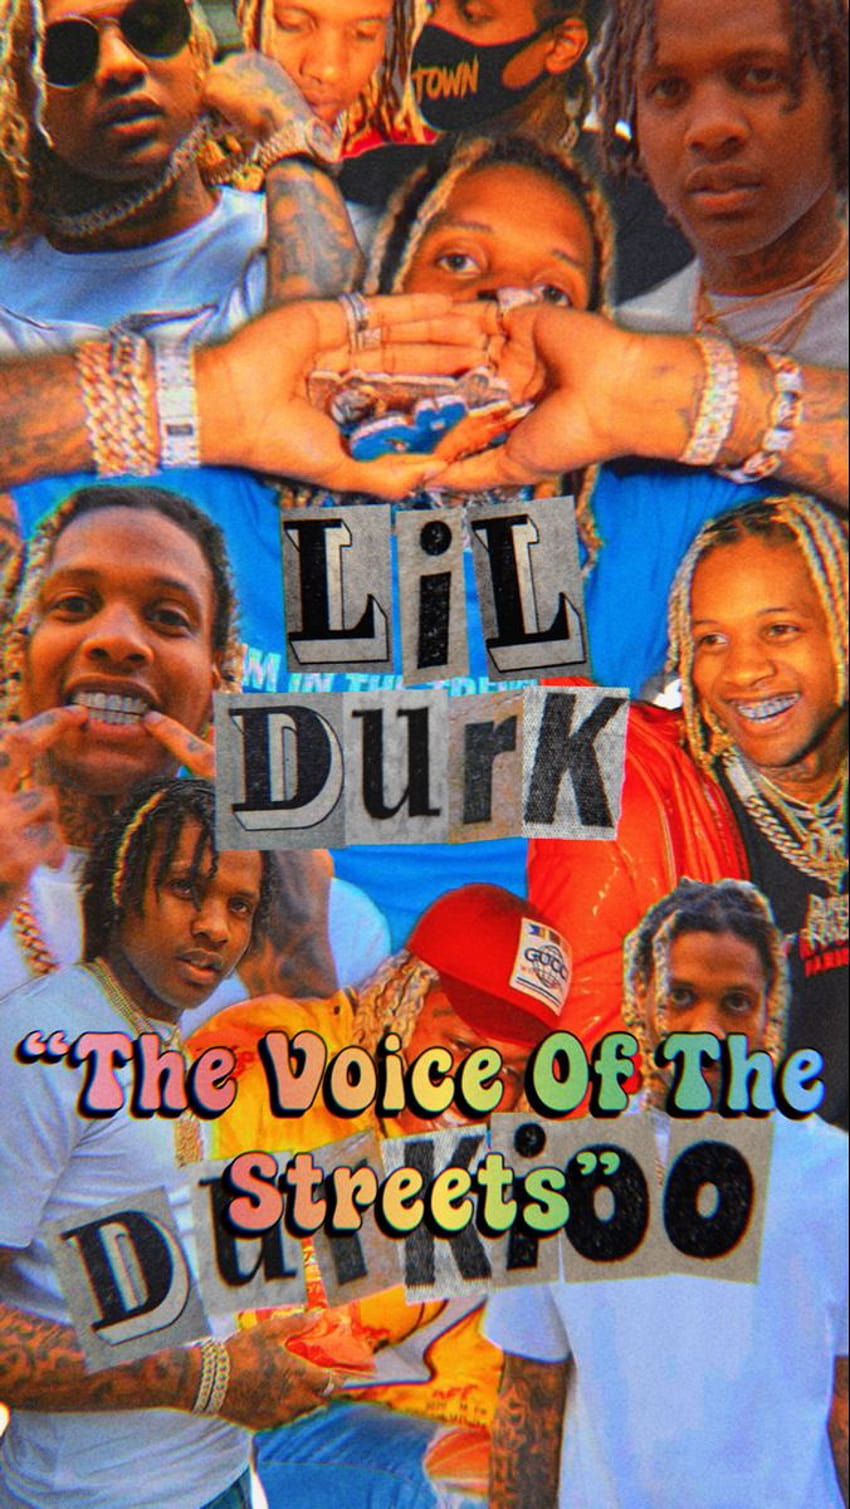 made by: @nudyswife, lil durk iphone HD phone wallpaper